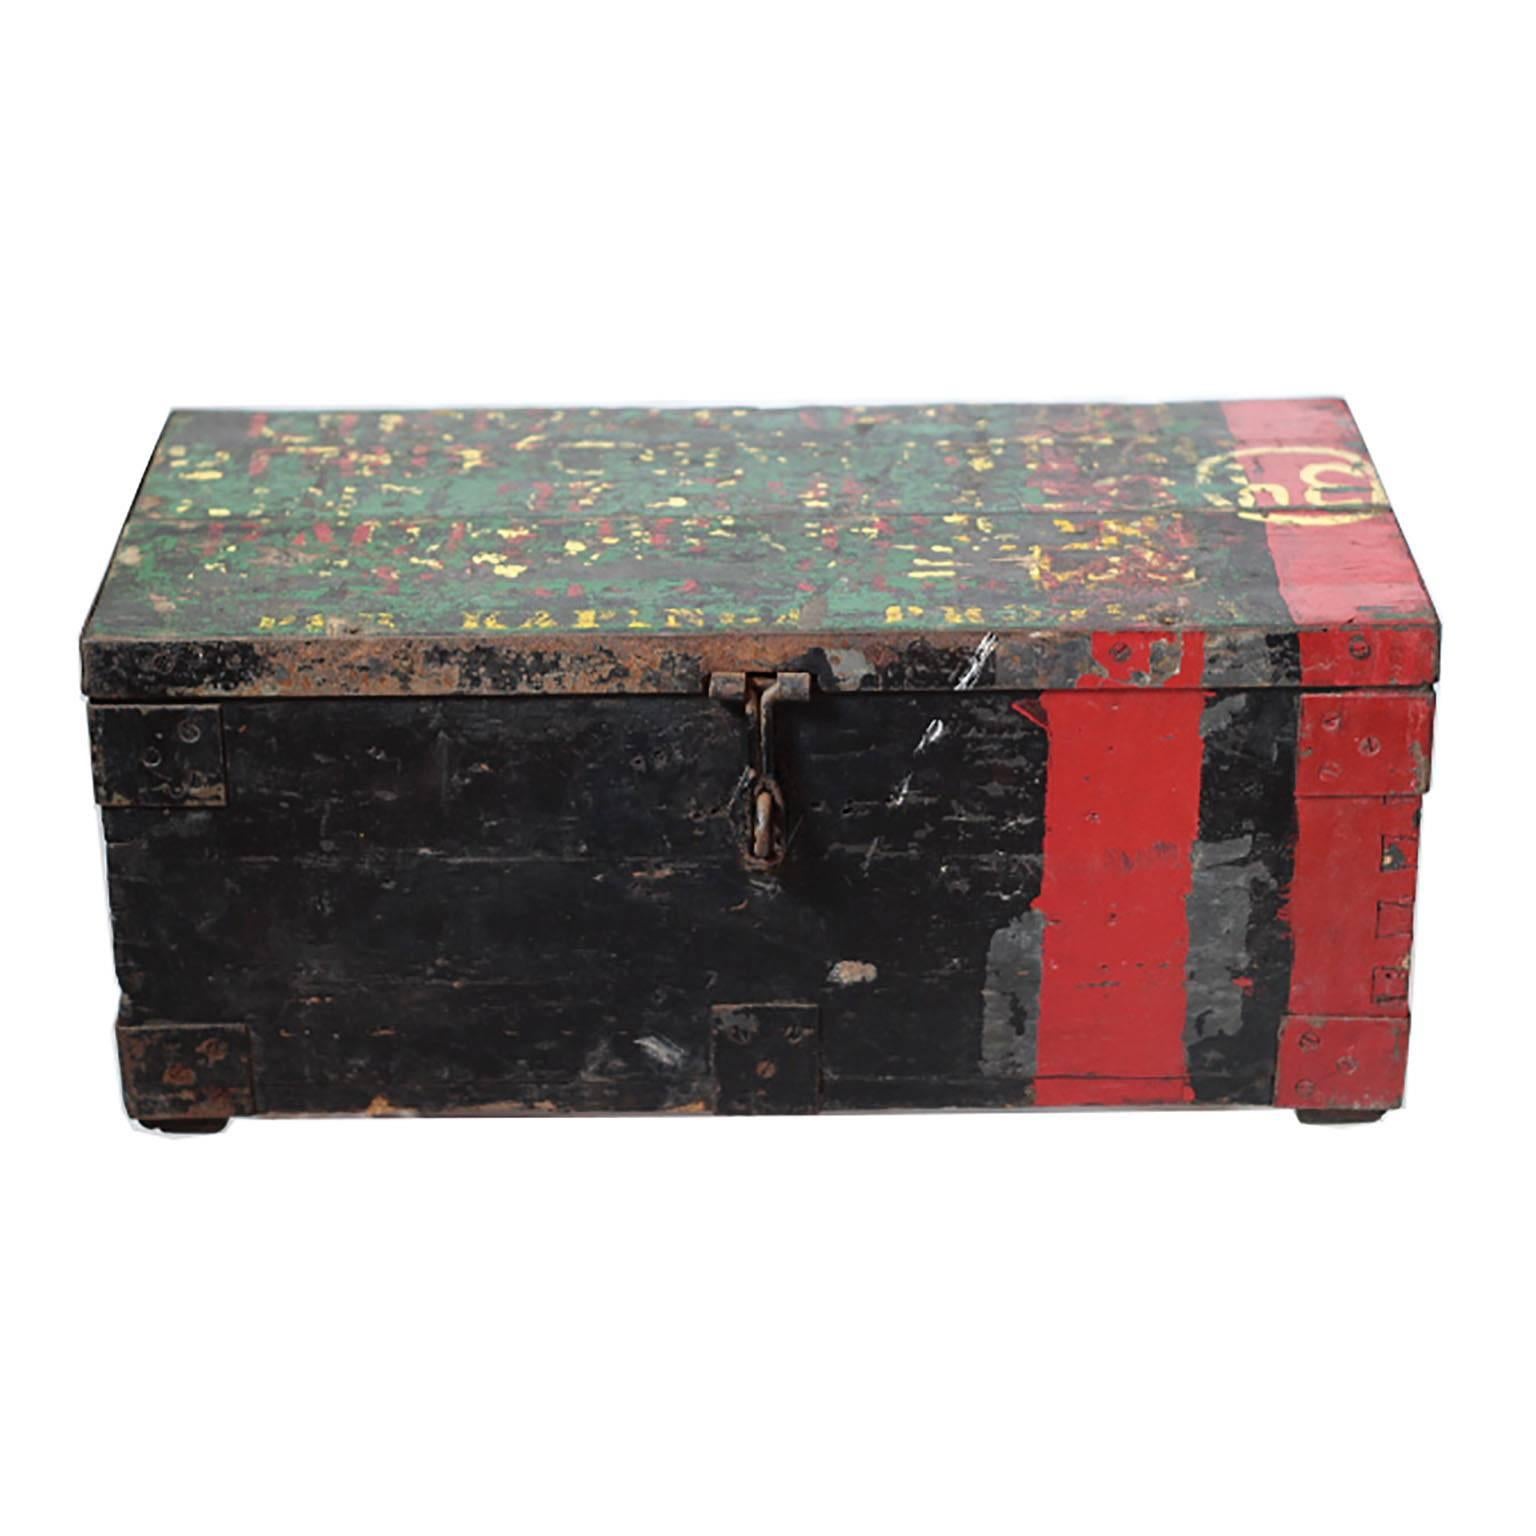 Painted wood and metal United States Army trunk. The date 